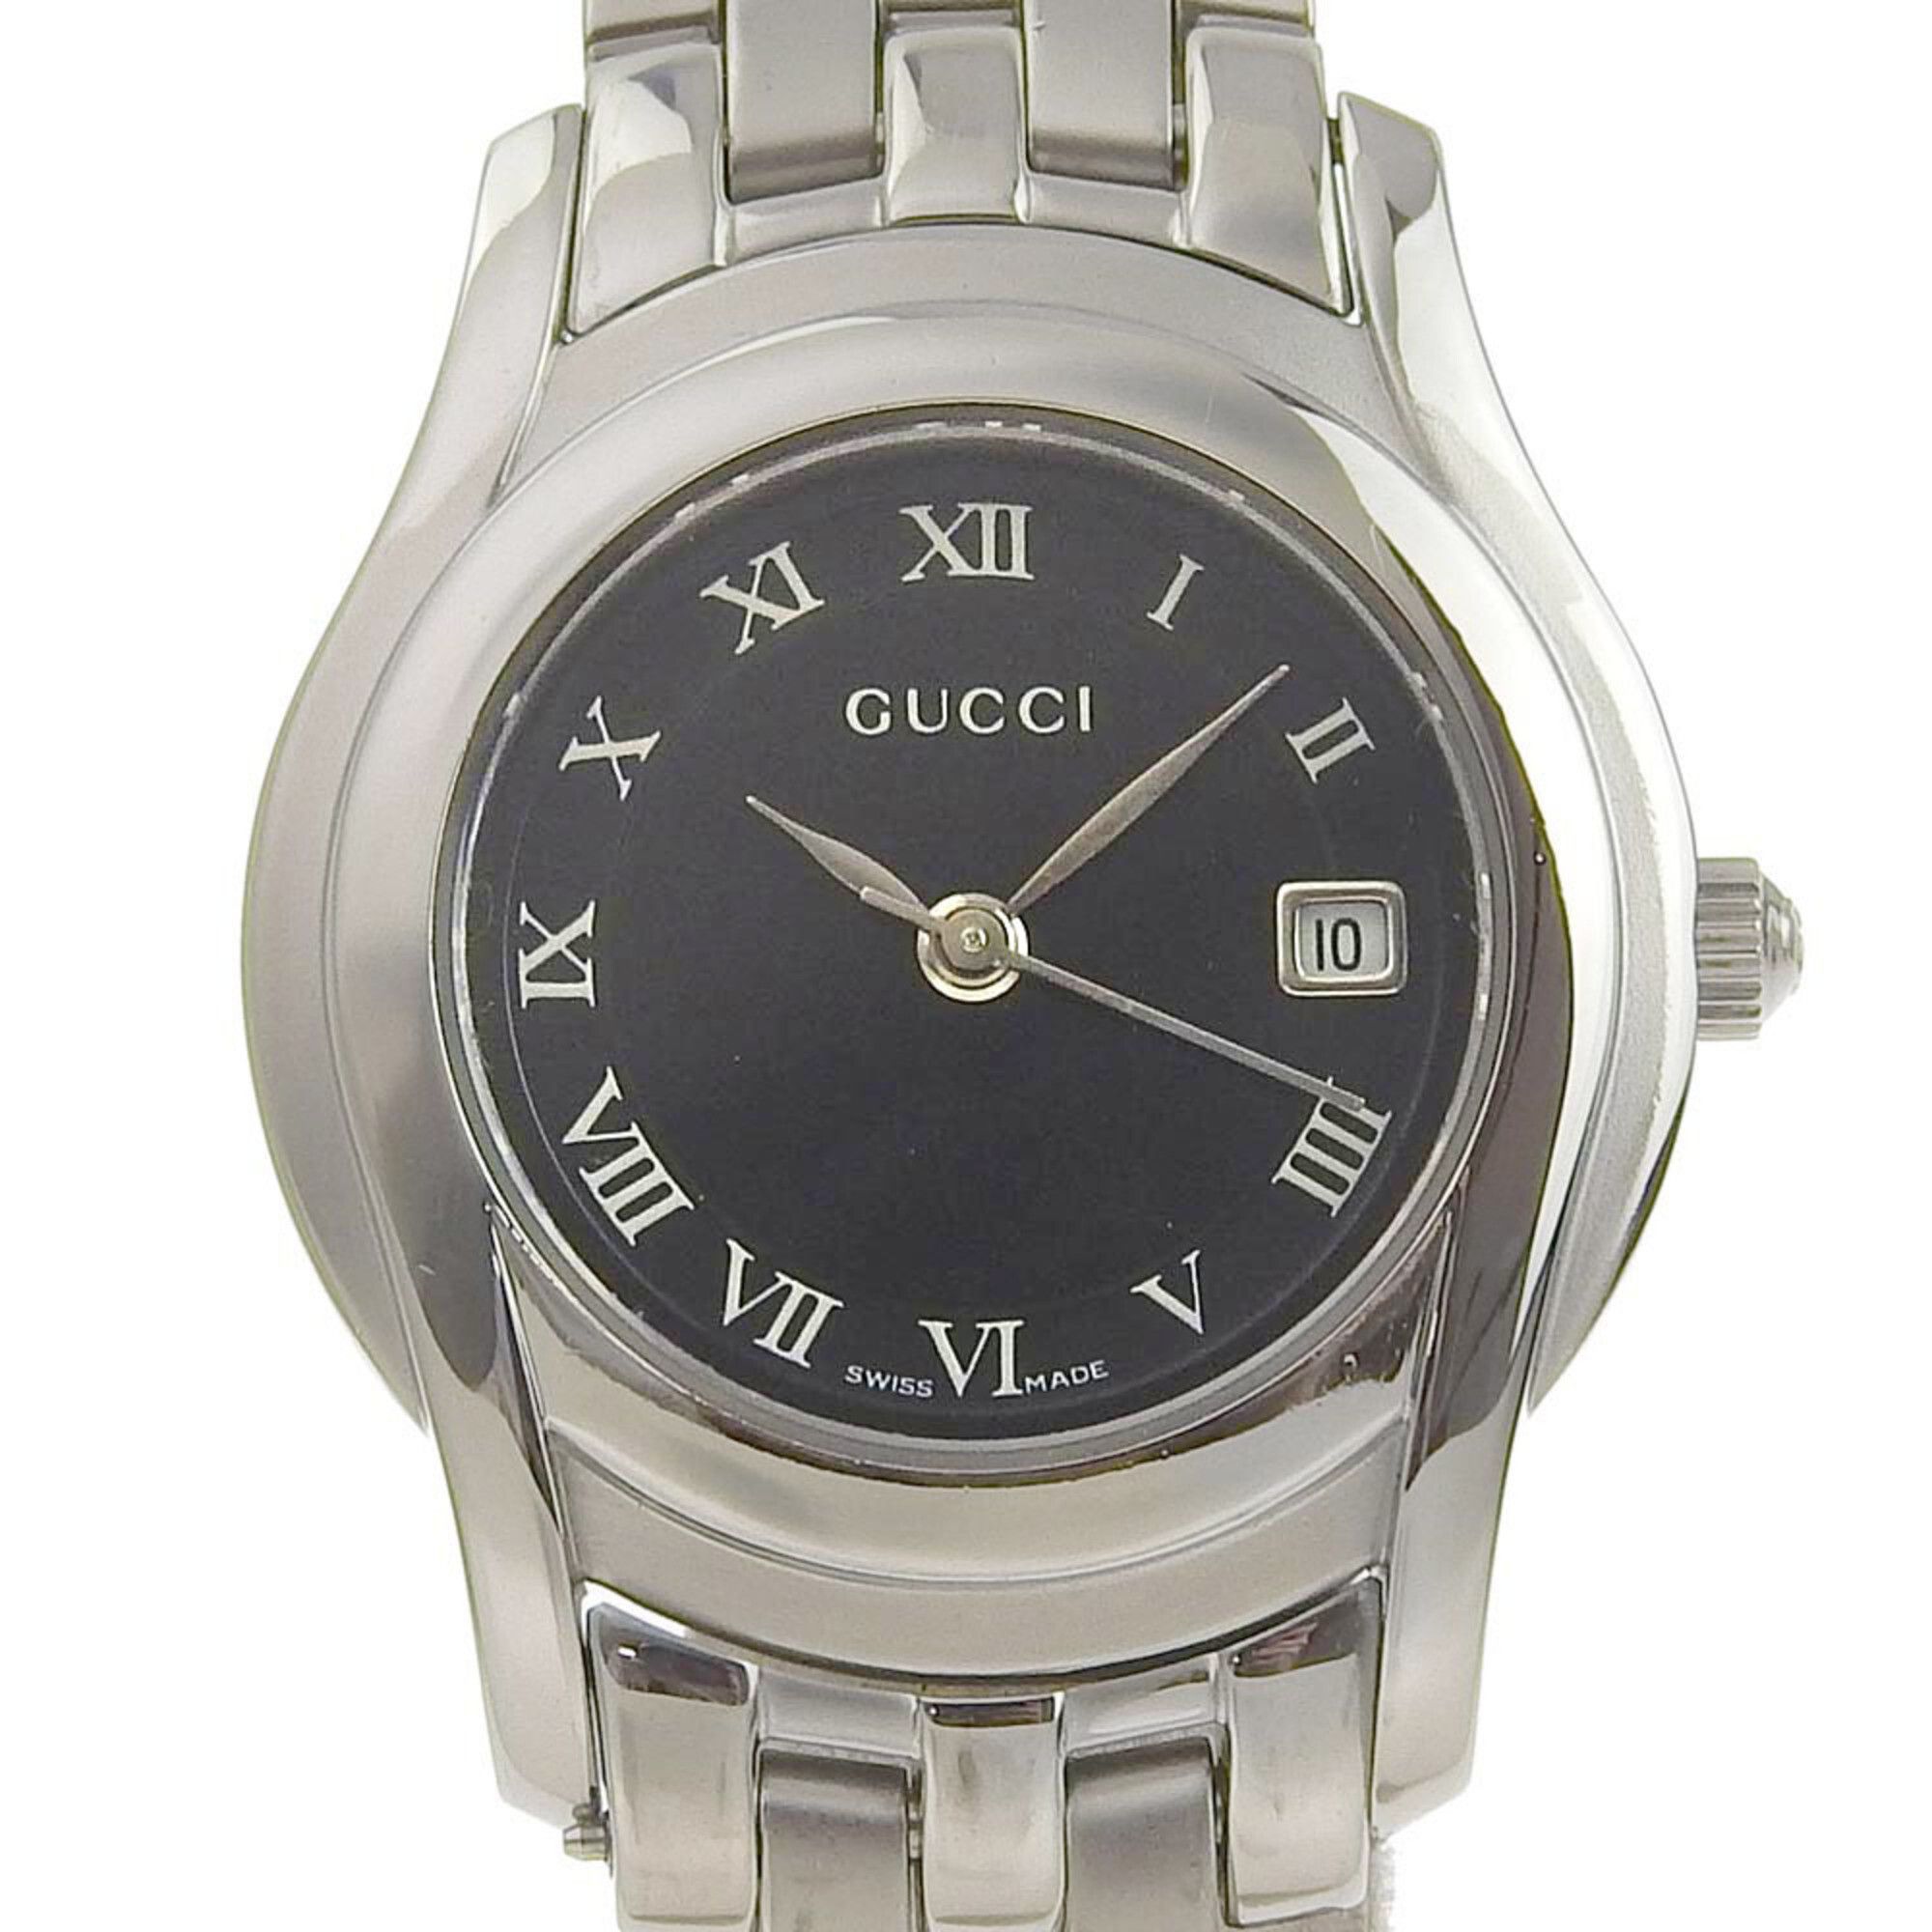 Gucci GUCCI Watch 5500L Stainless Steel Swiss Made Silver Quartz Analog ...